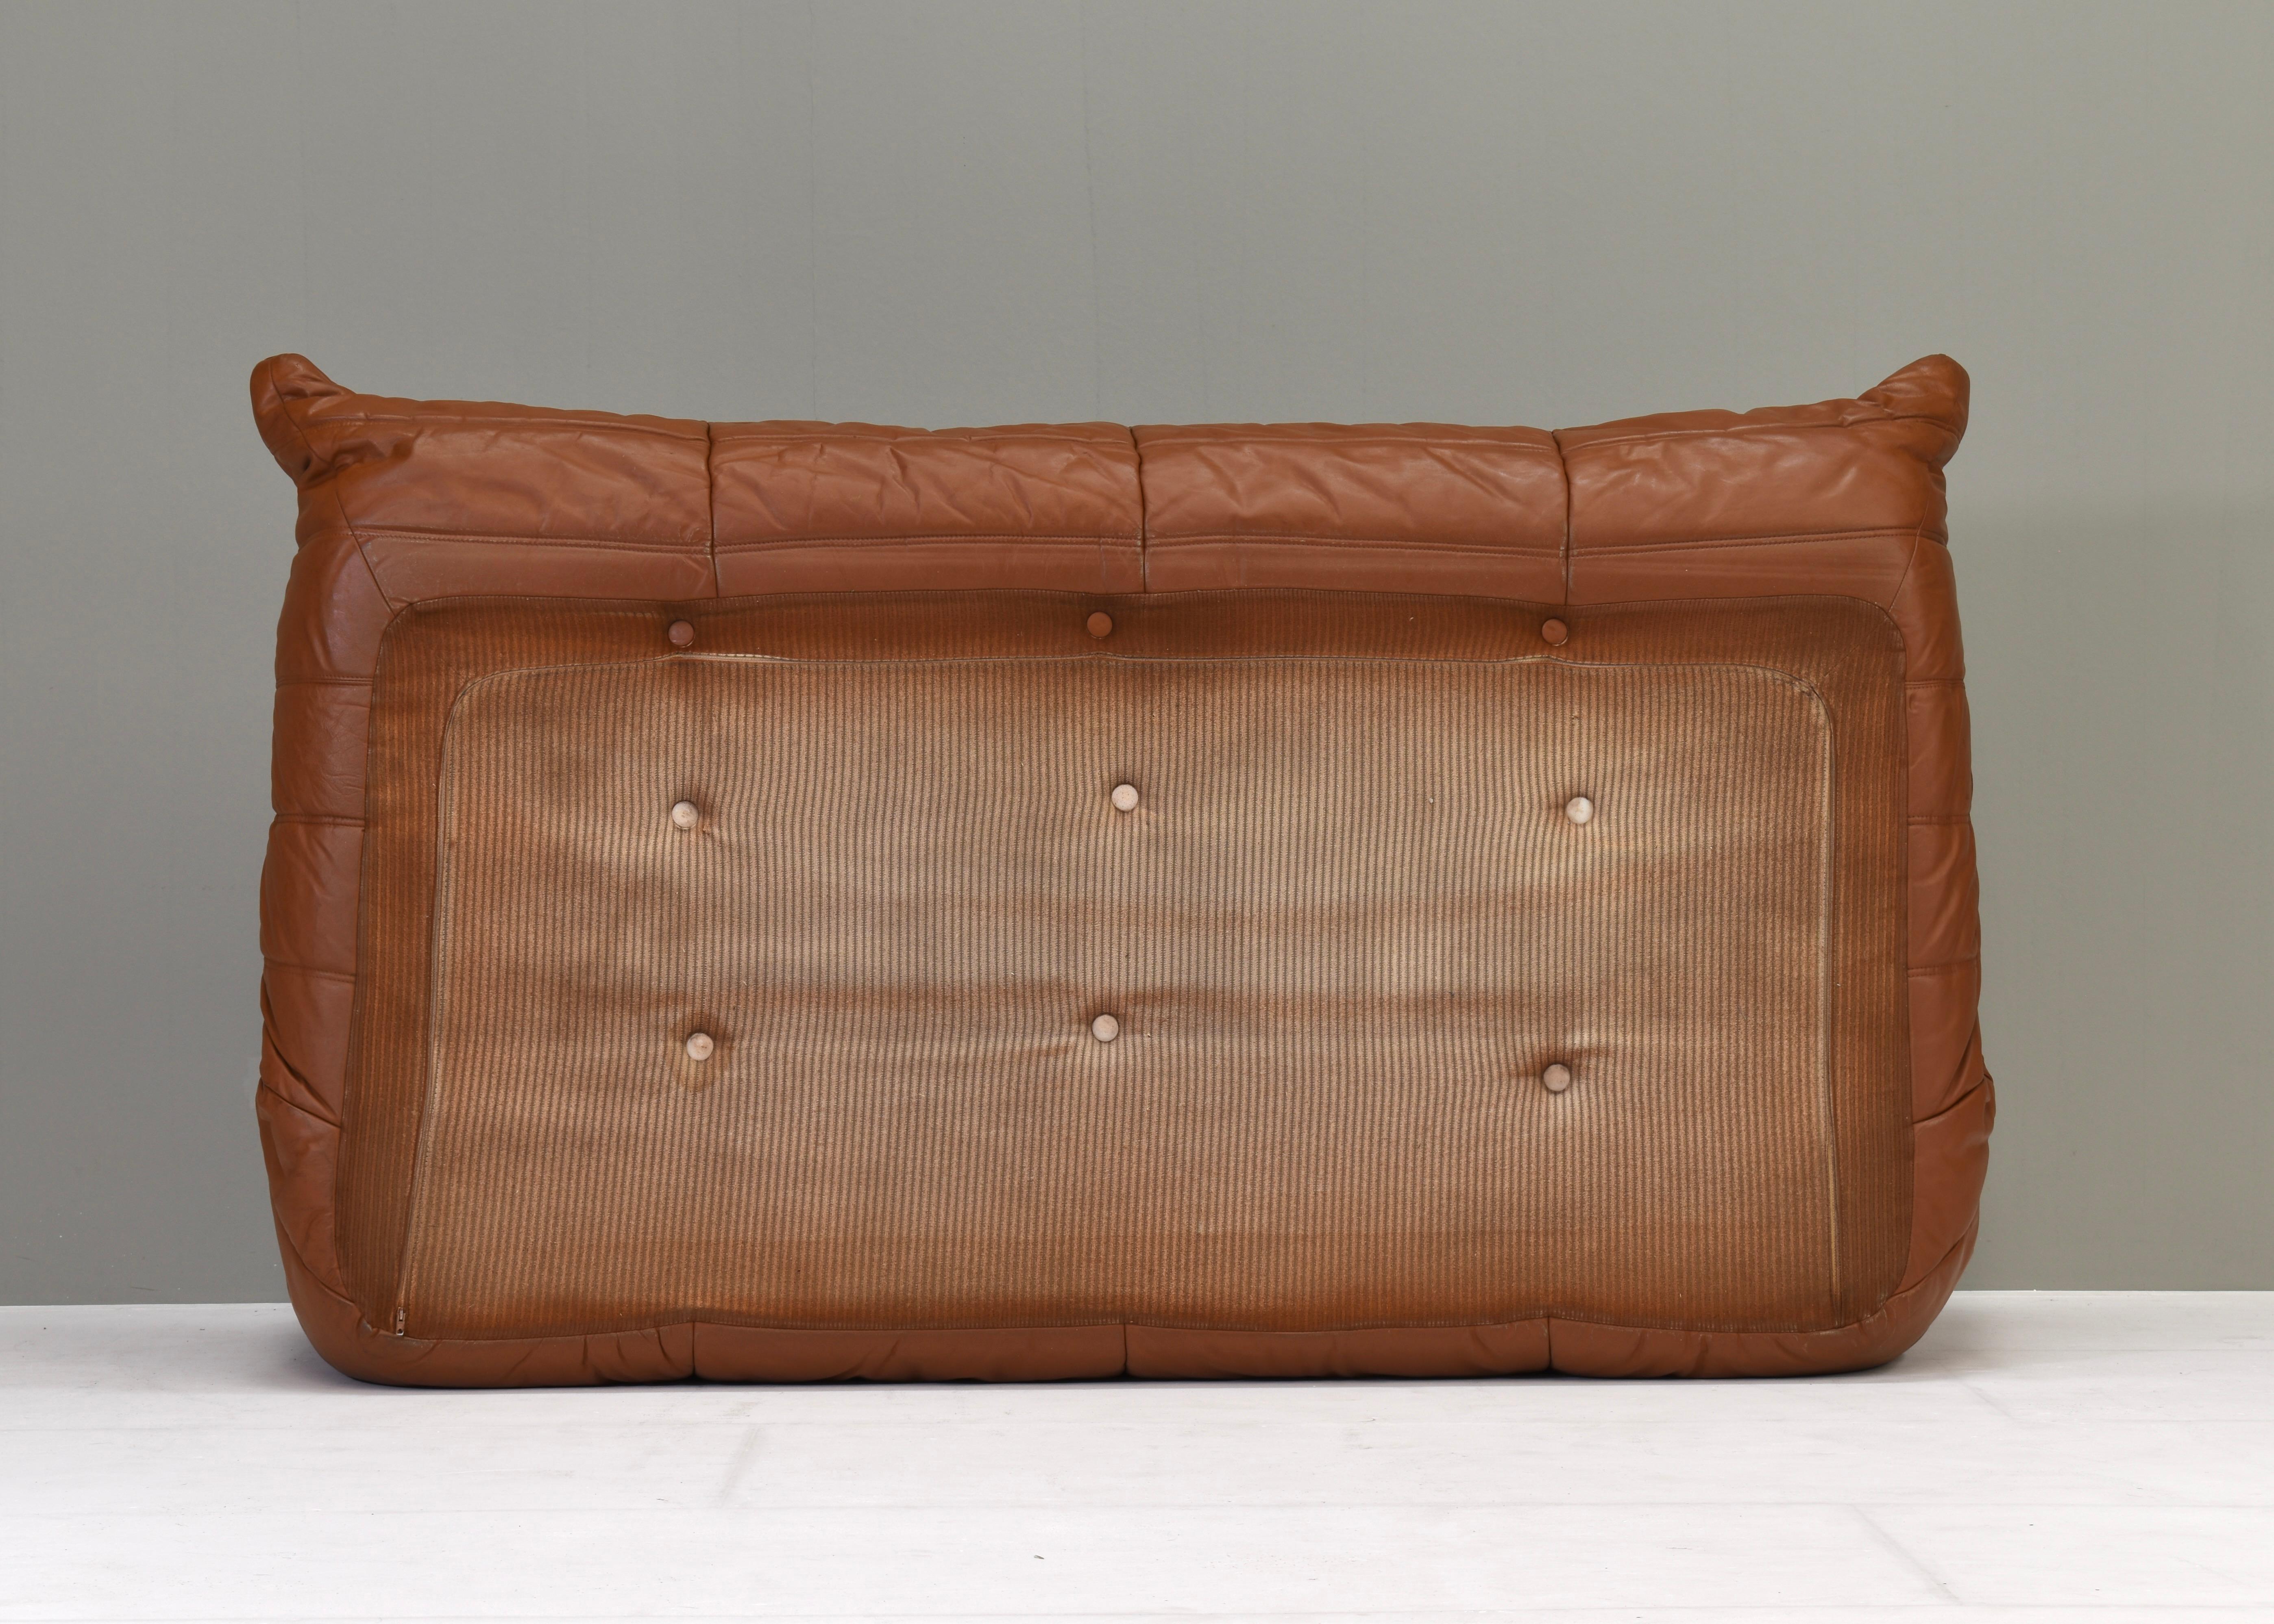 Togo Sofa by Michel Ducaroy for Ligne Roset in Tan Leather France, circa 1970 6